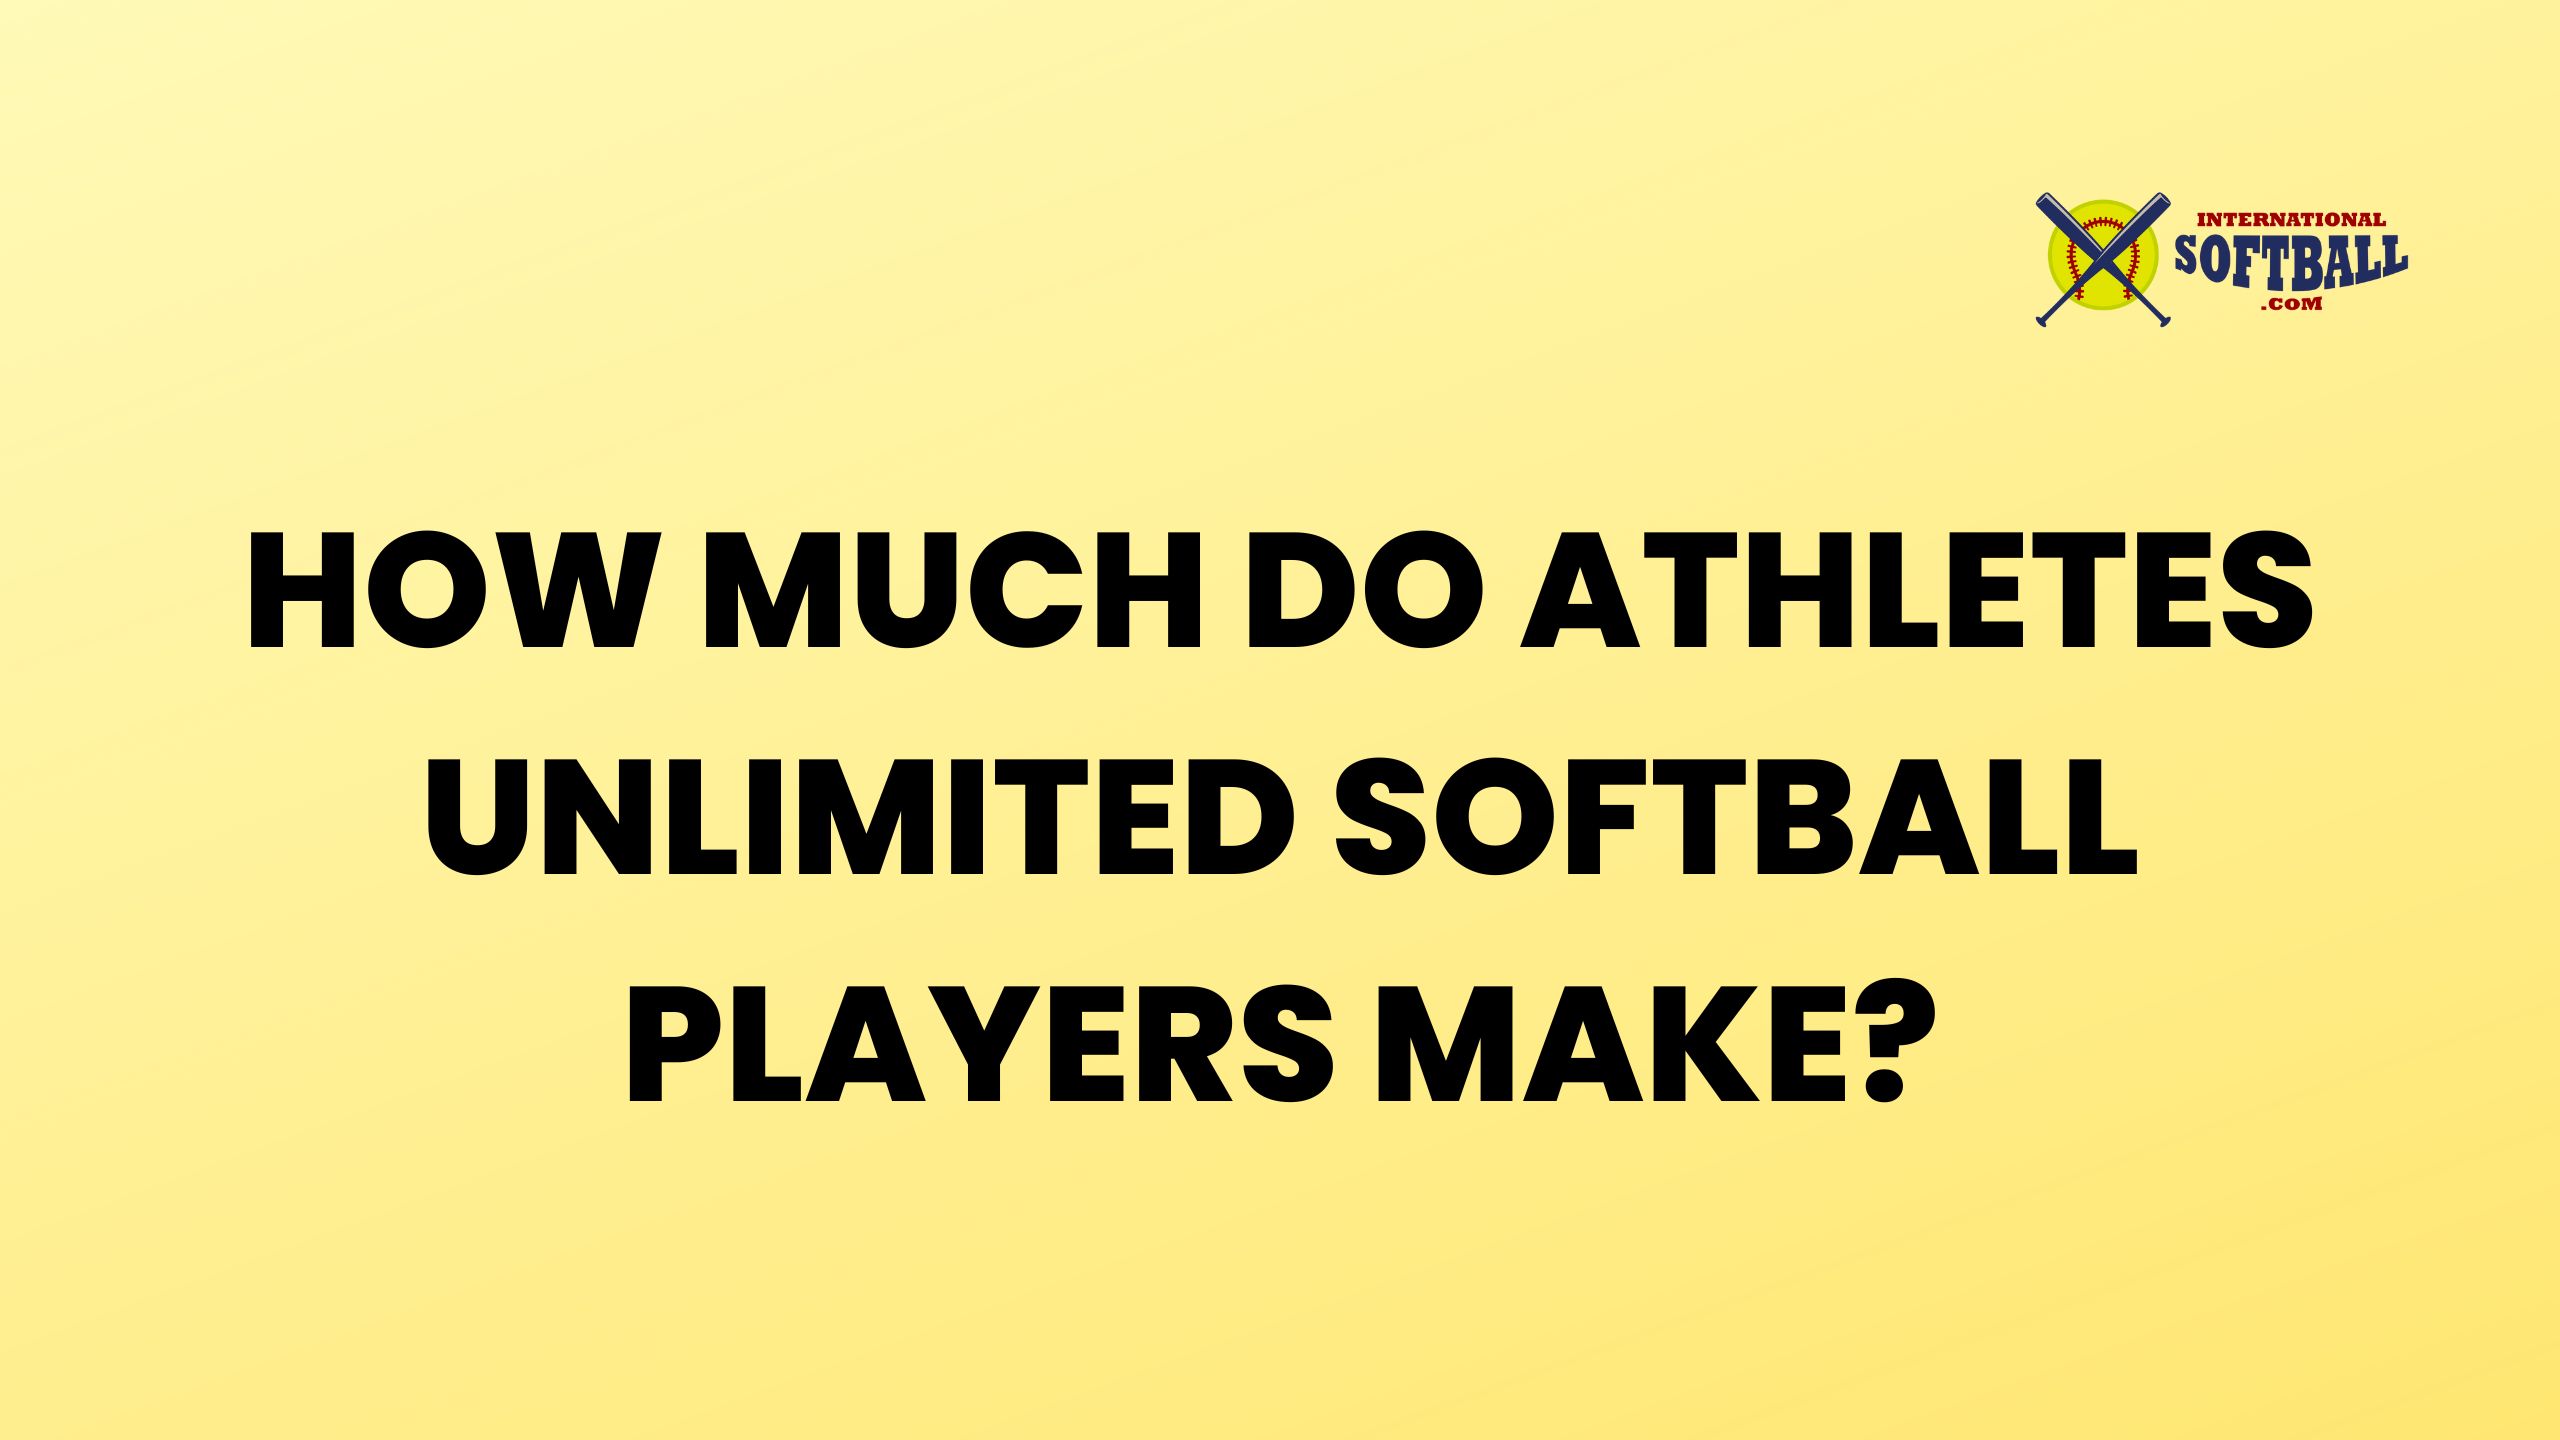 HOW MUCH DO ATHLETES UNLIMITED SOFTBALL PLAYERS MAKE